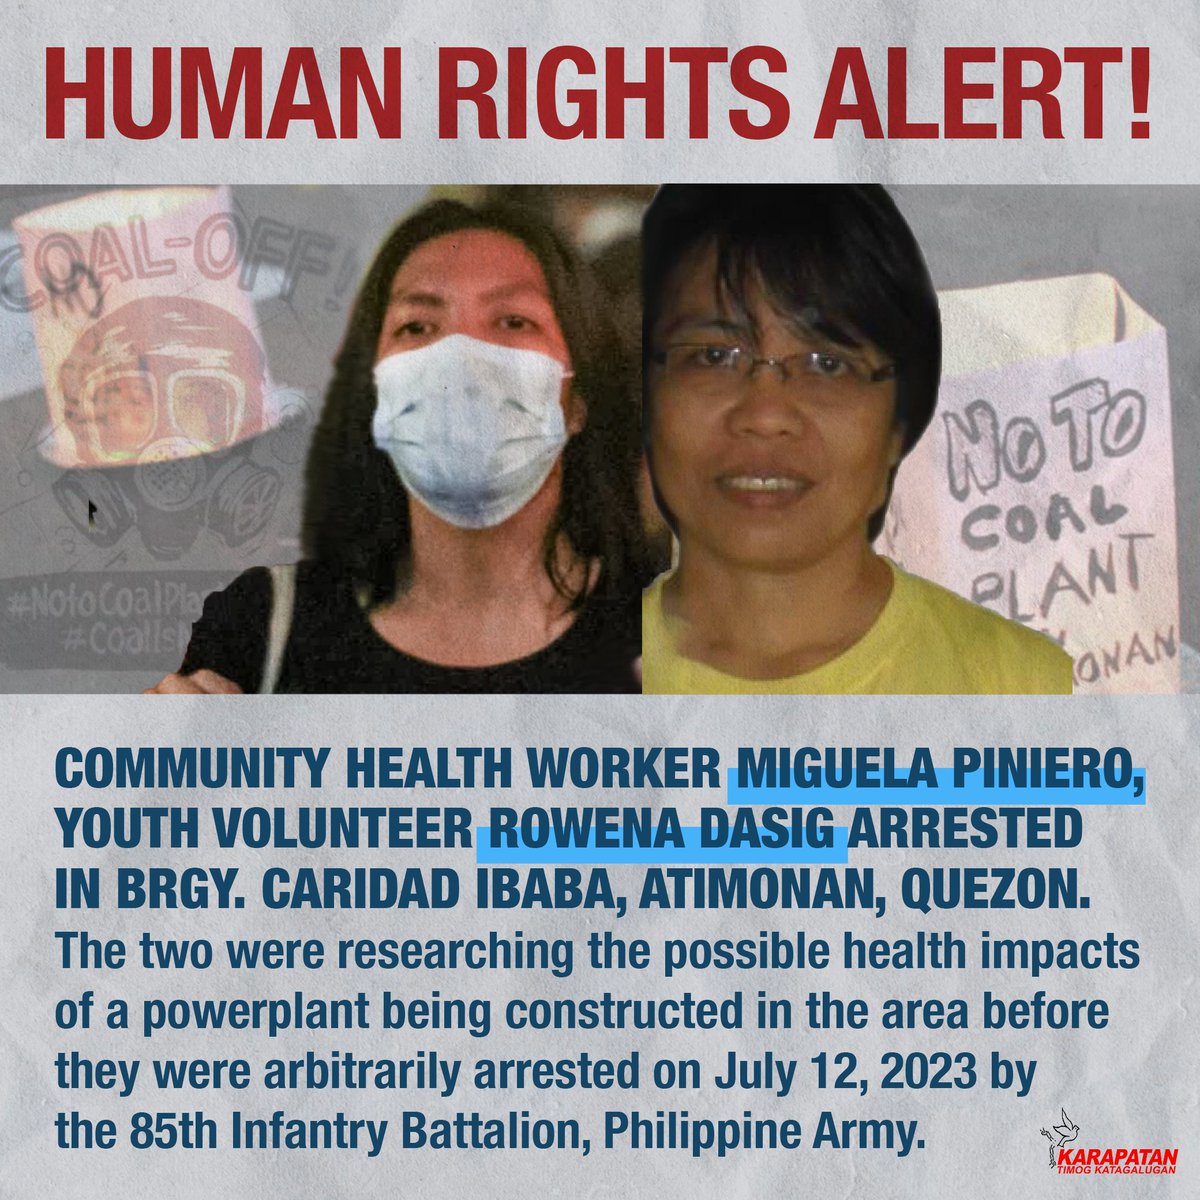 HUMAN RIGHTS ALERT!

Community health worker Miguela Peniero, youth volunteer Rowena Dasig arbitrarily arrested in Brgy. Caridad Ibaba, Atimonan, Quezon on July 12, 2023 by the 85th Infantry Battalion.

#FreeMiguelaPeniero
#FreeRowenaDasig
#StopTheAttacks
#DefendSouthernTagalog